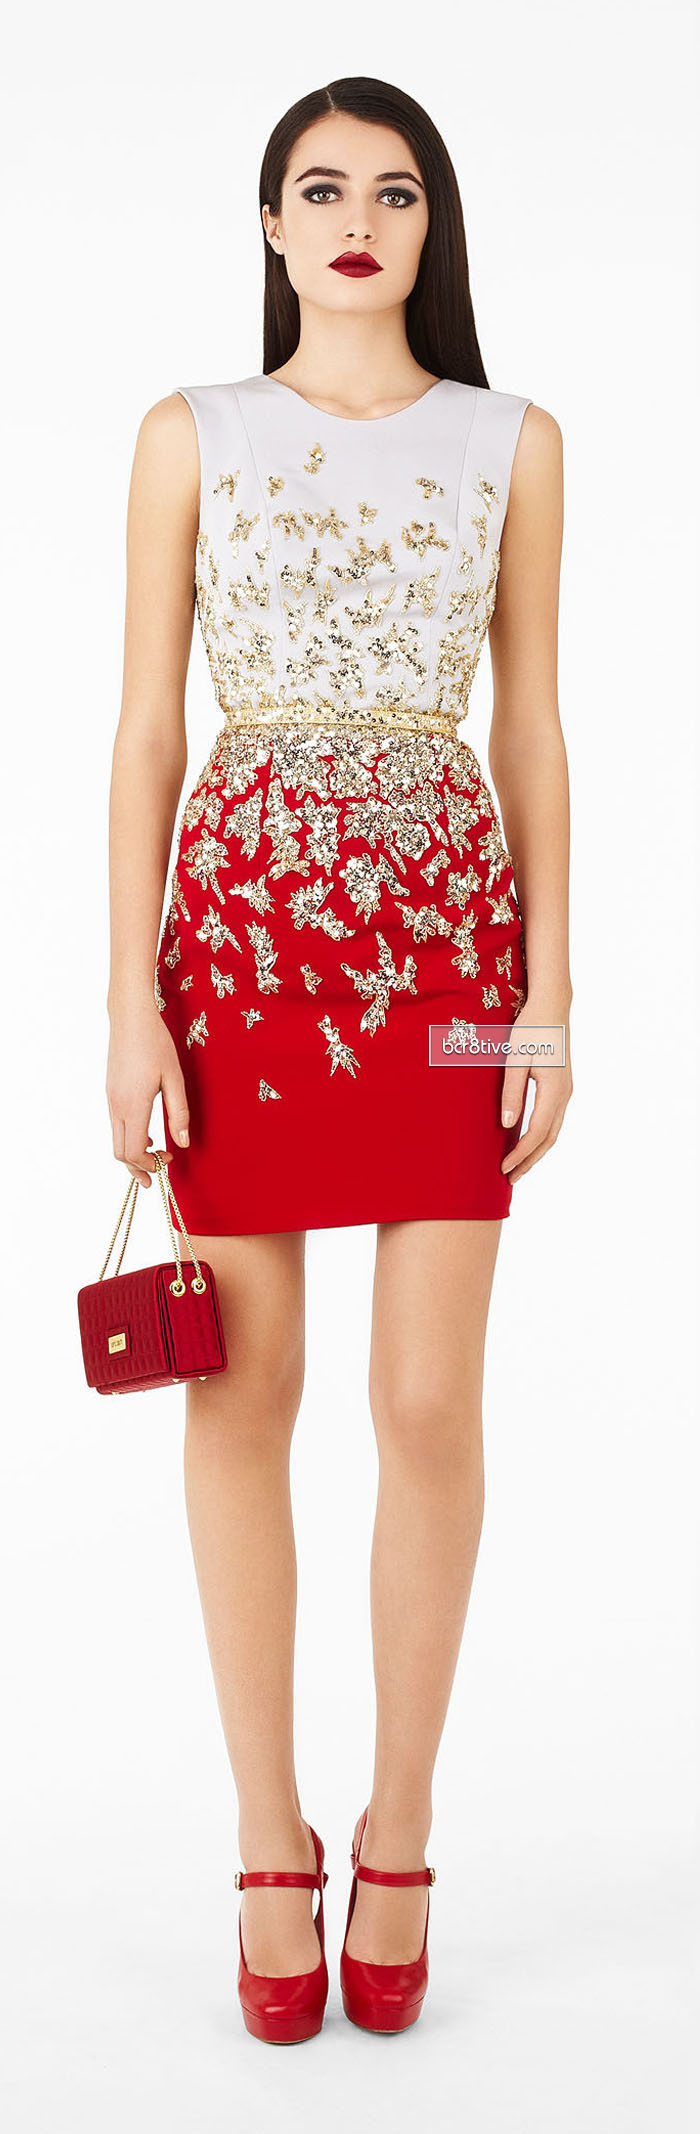 Georges Hobeika Signature Collection Fall Winter 2013 2014